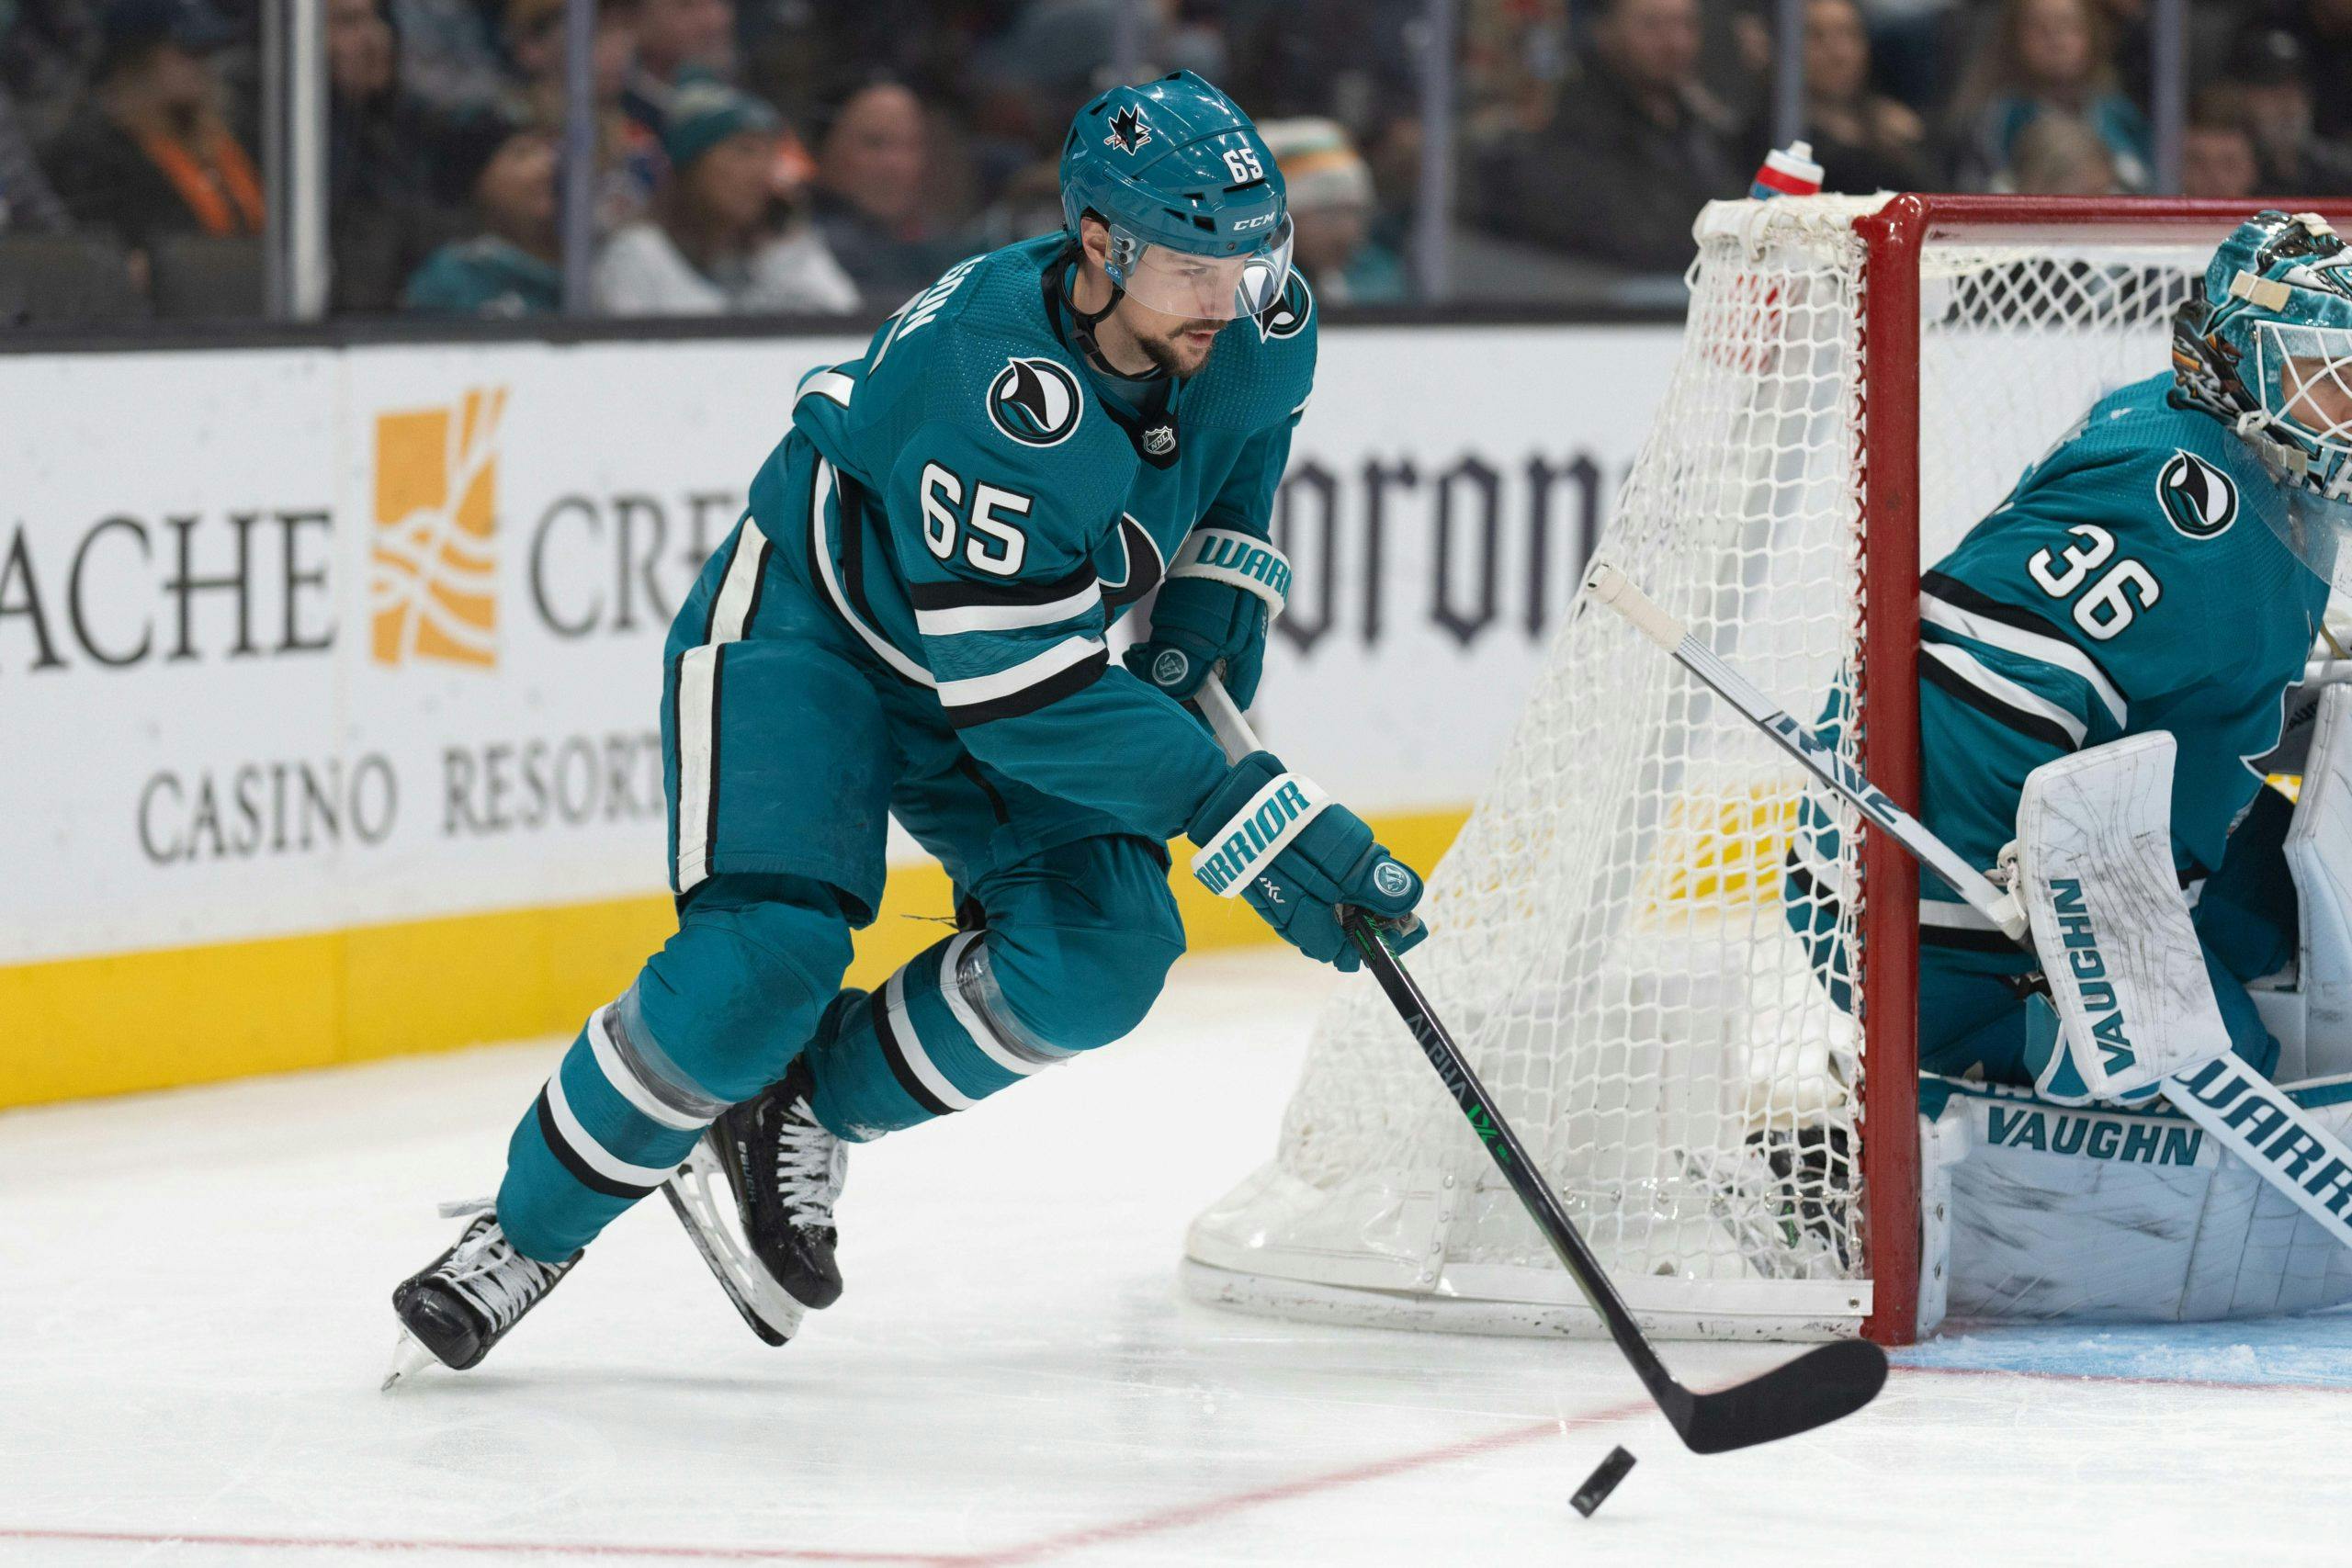 Vancouver Canucks should be third team in an Erik Karlsson trade